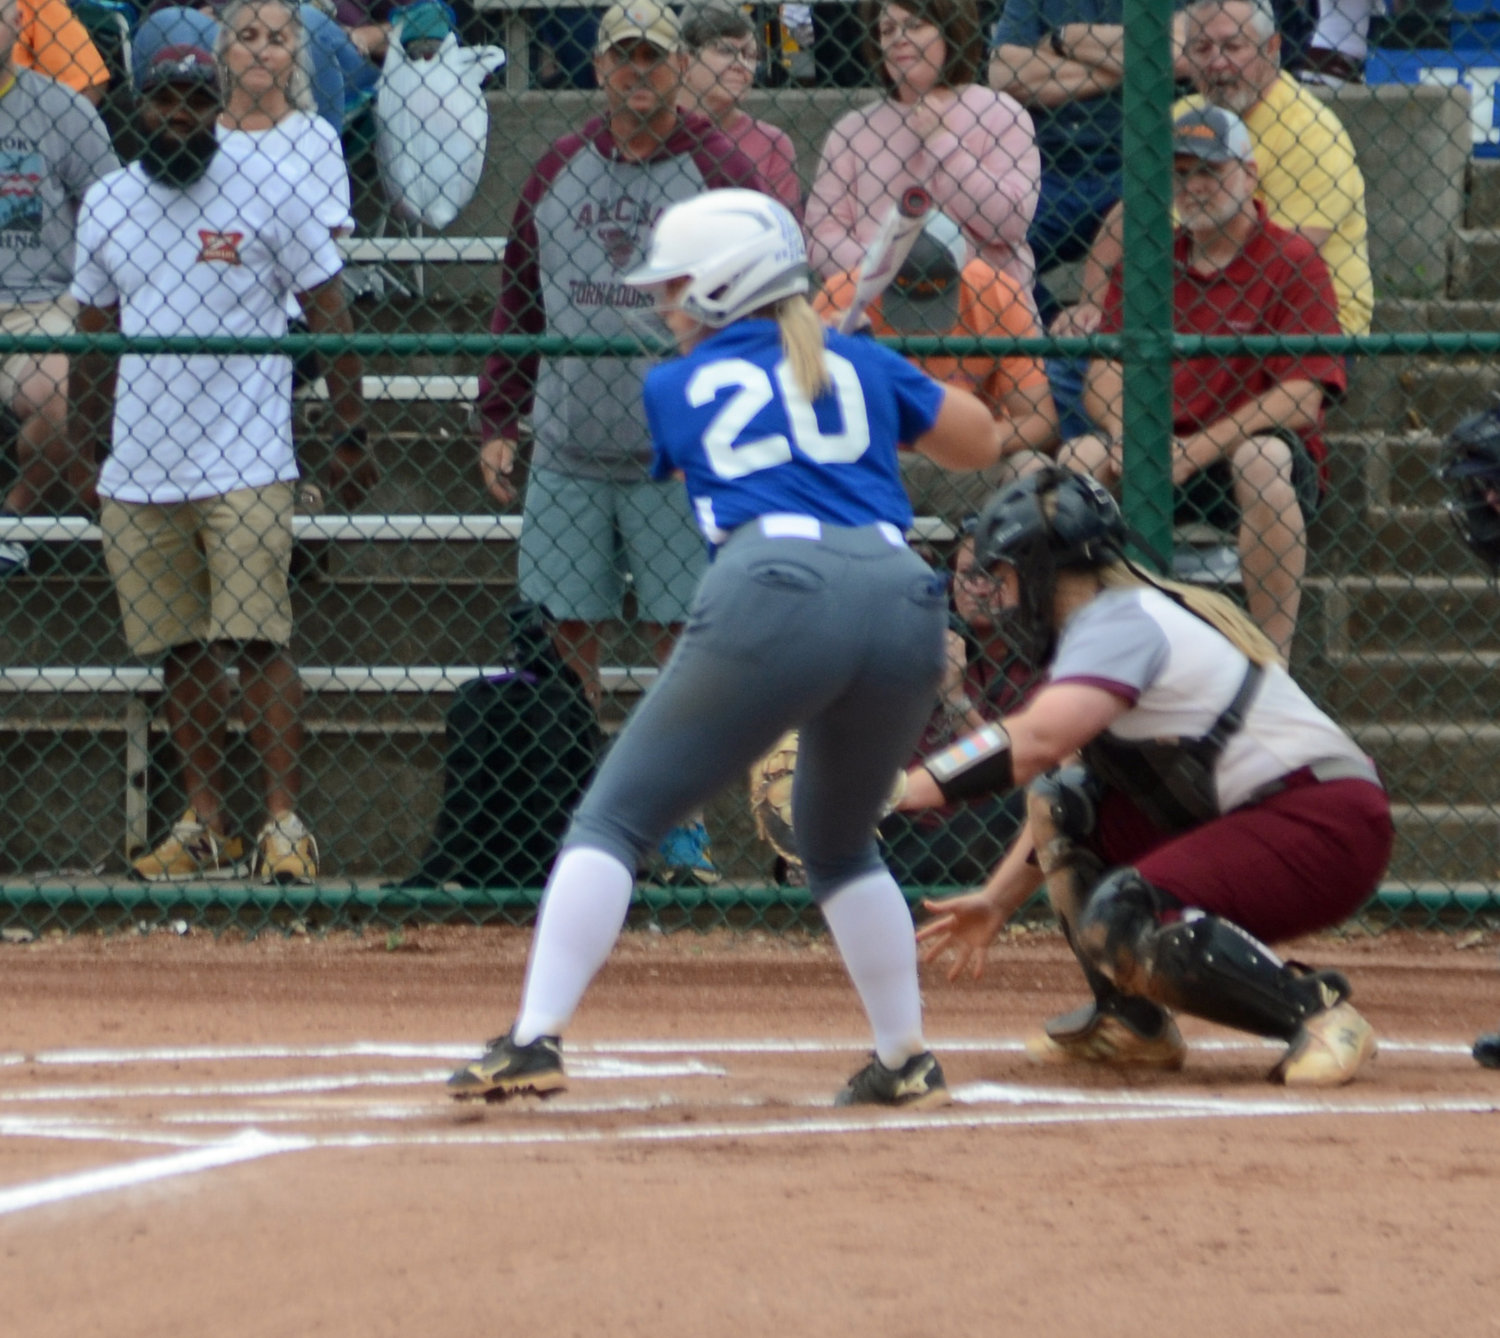 Leslie Bartoli had two hits, two RBIs, and two runs scored versus Alcoa.